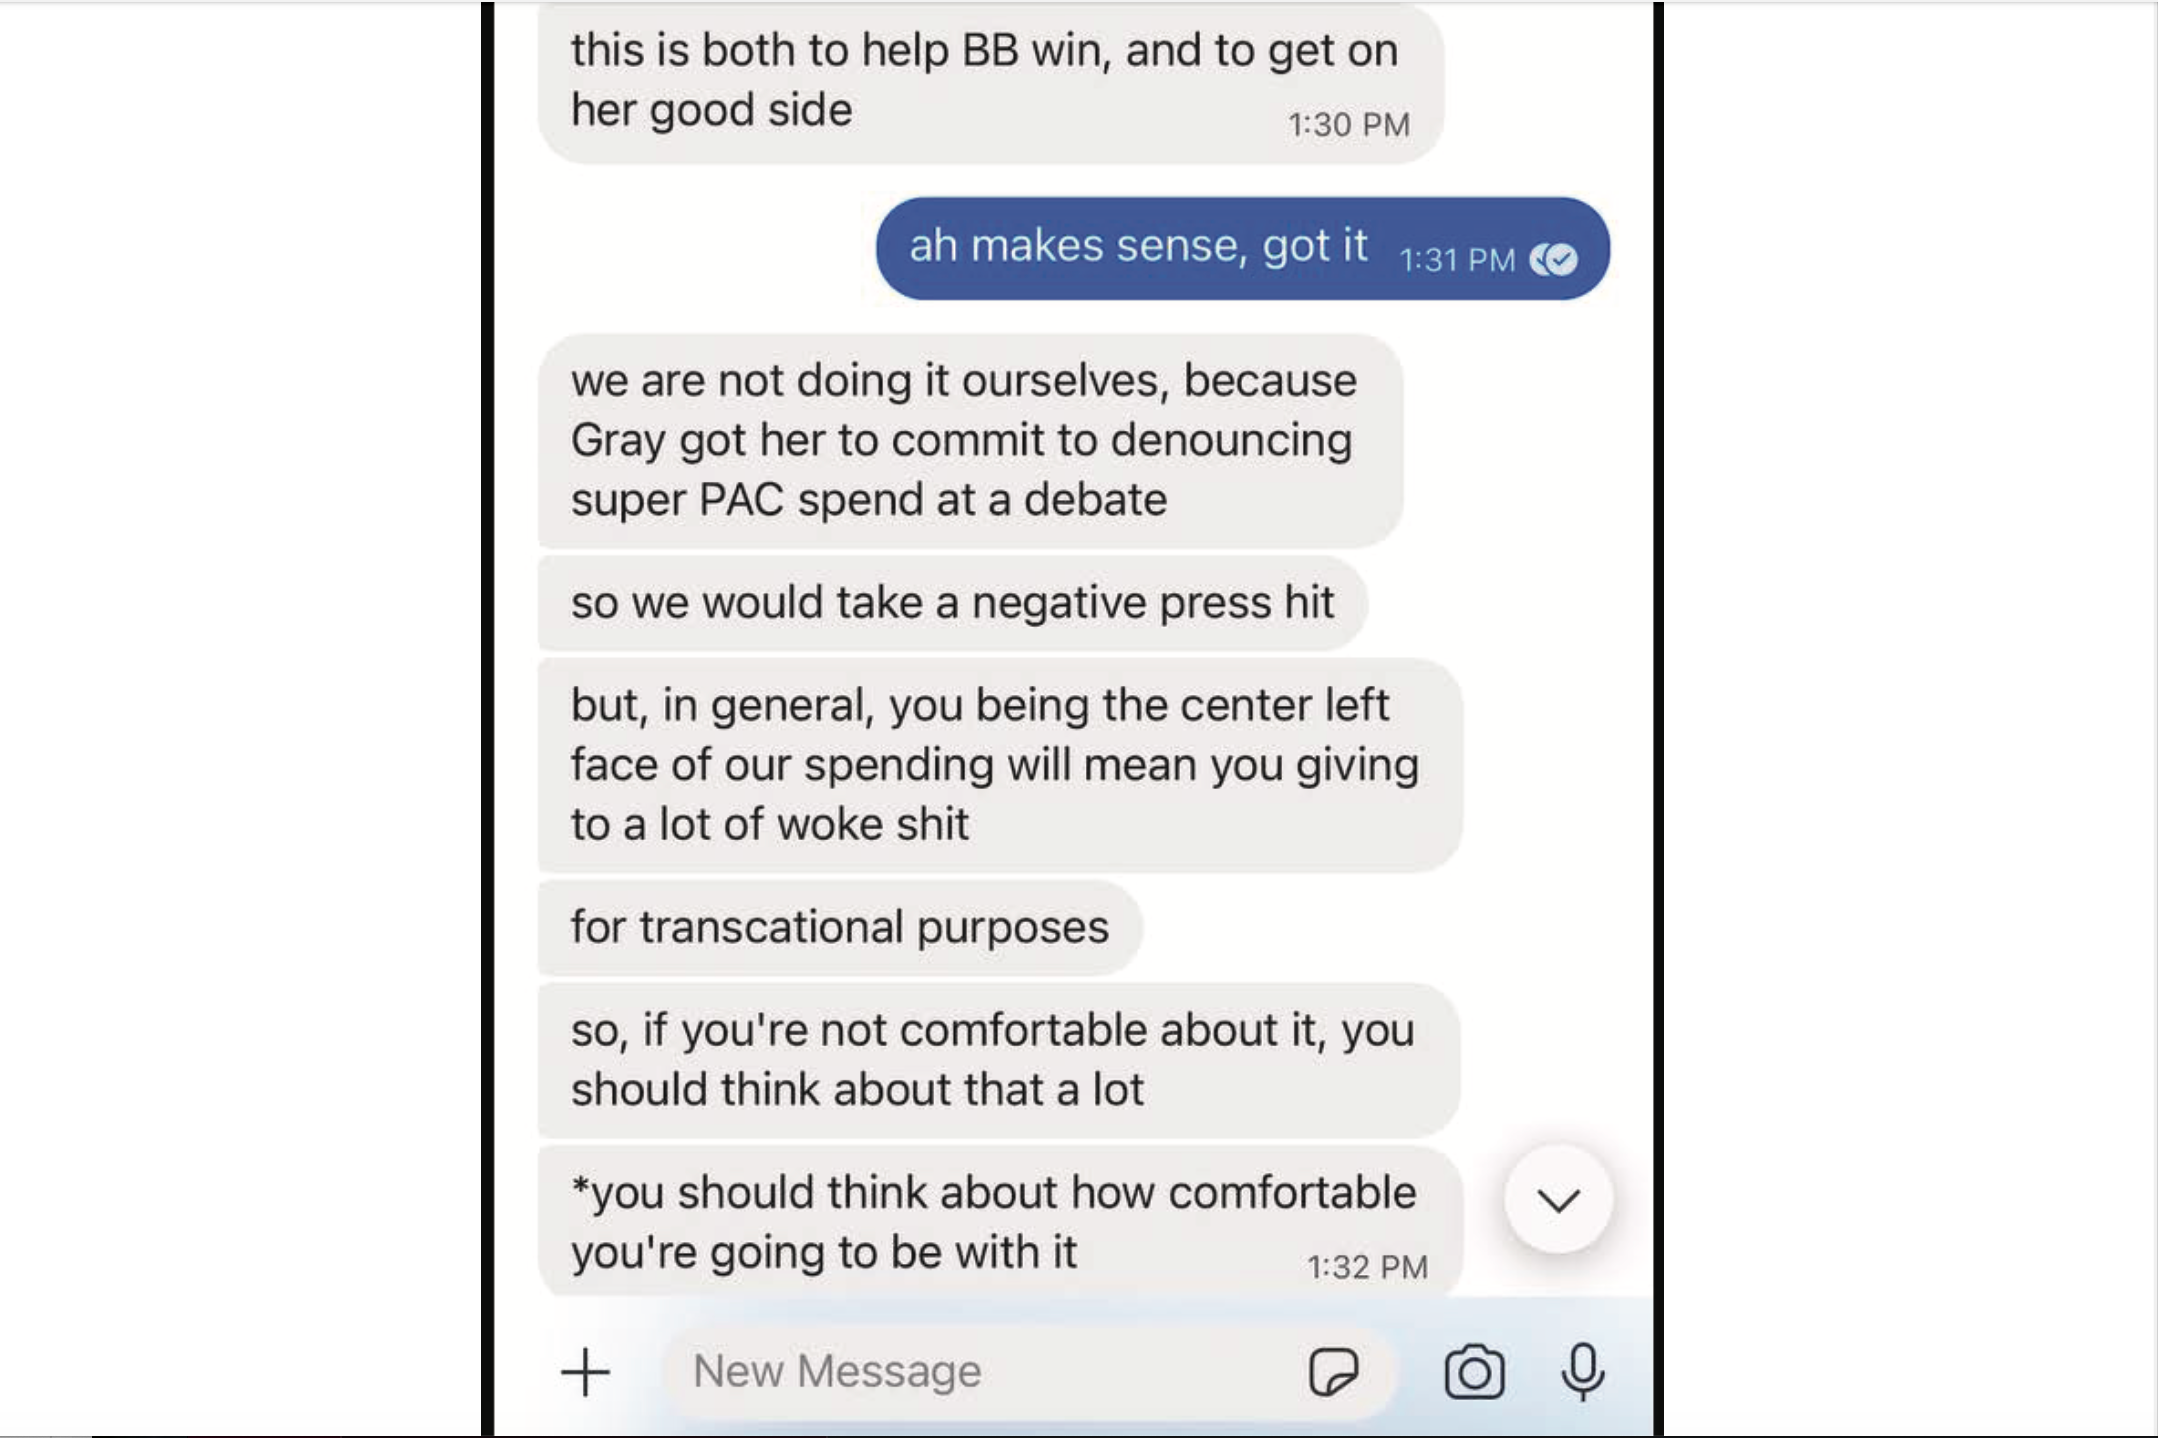 An exchange of Signal chats reading in part: "this is both to help BB win, and to get on her good side." "ah makes sense, got it." "in general, you being the center left face of our spending will mean you giving to a lot of woke shit. for transactional purposes."